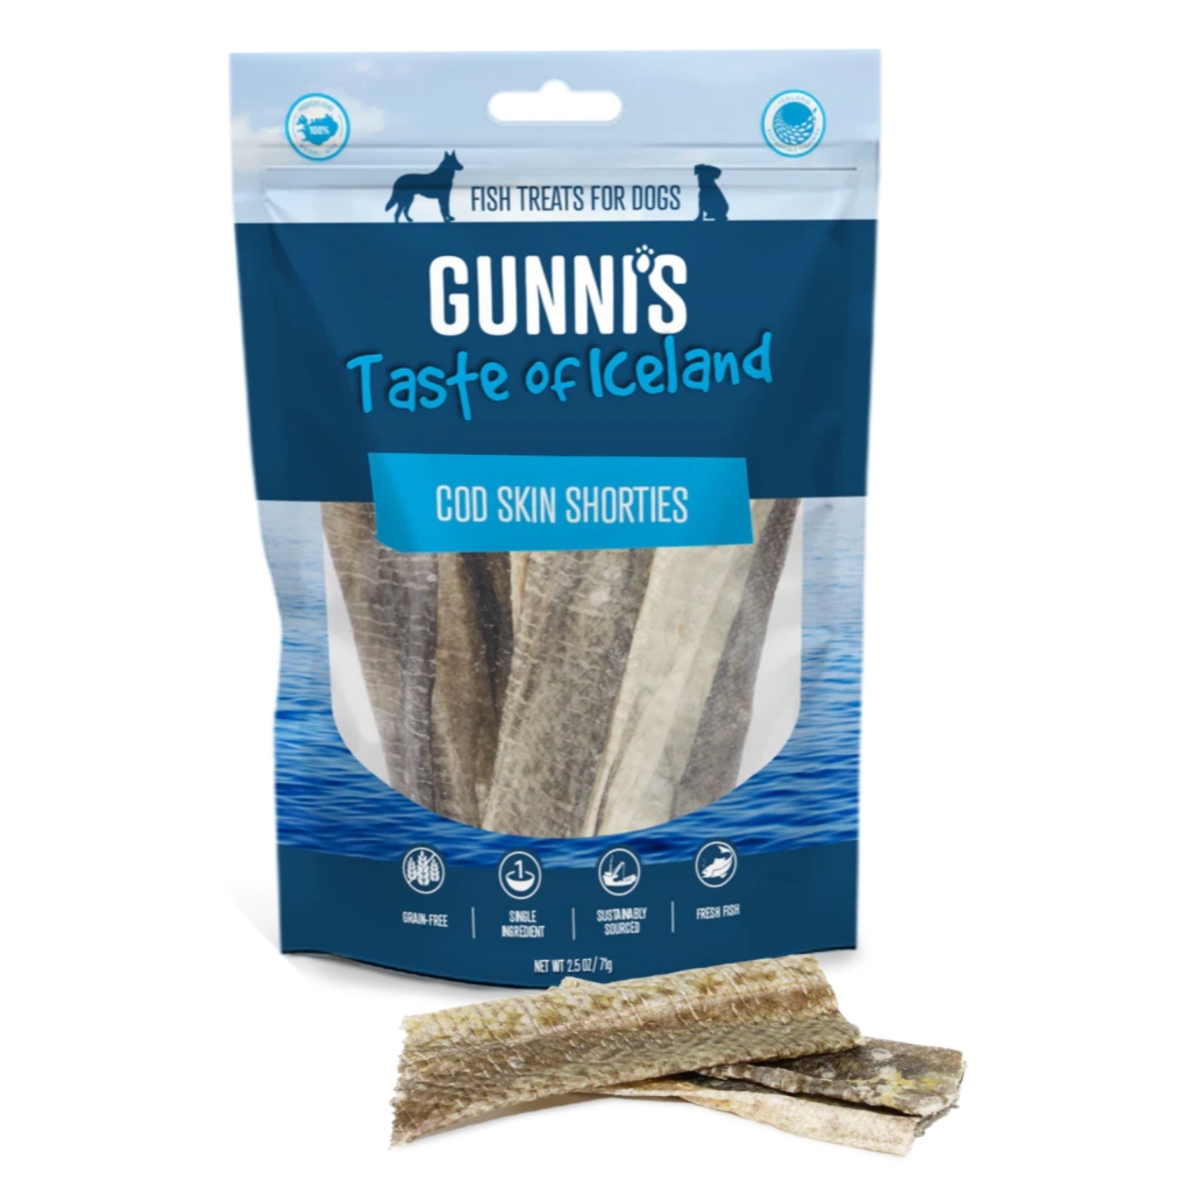 Picture of Gunnis 850043701279 2.5 oz Cod Skins Shorties Dog Treats